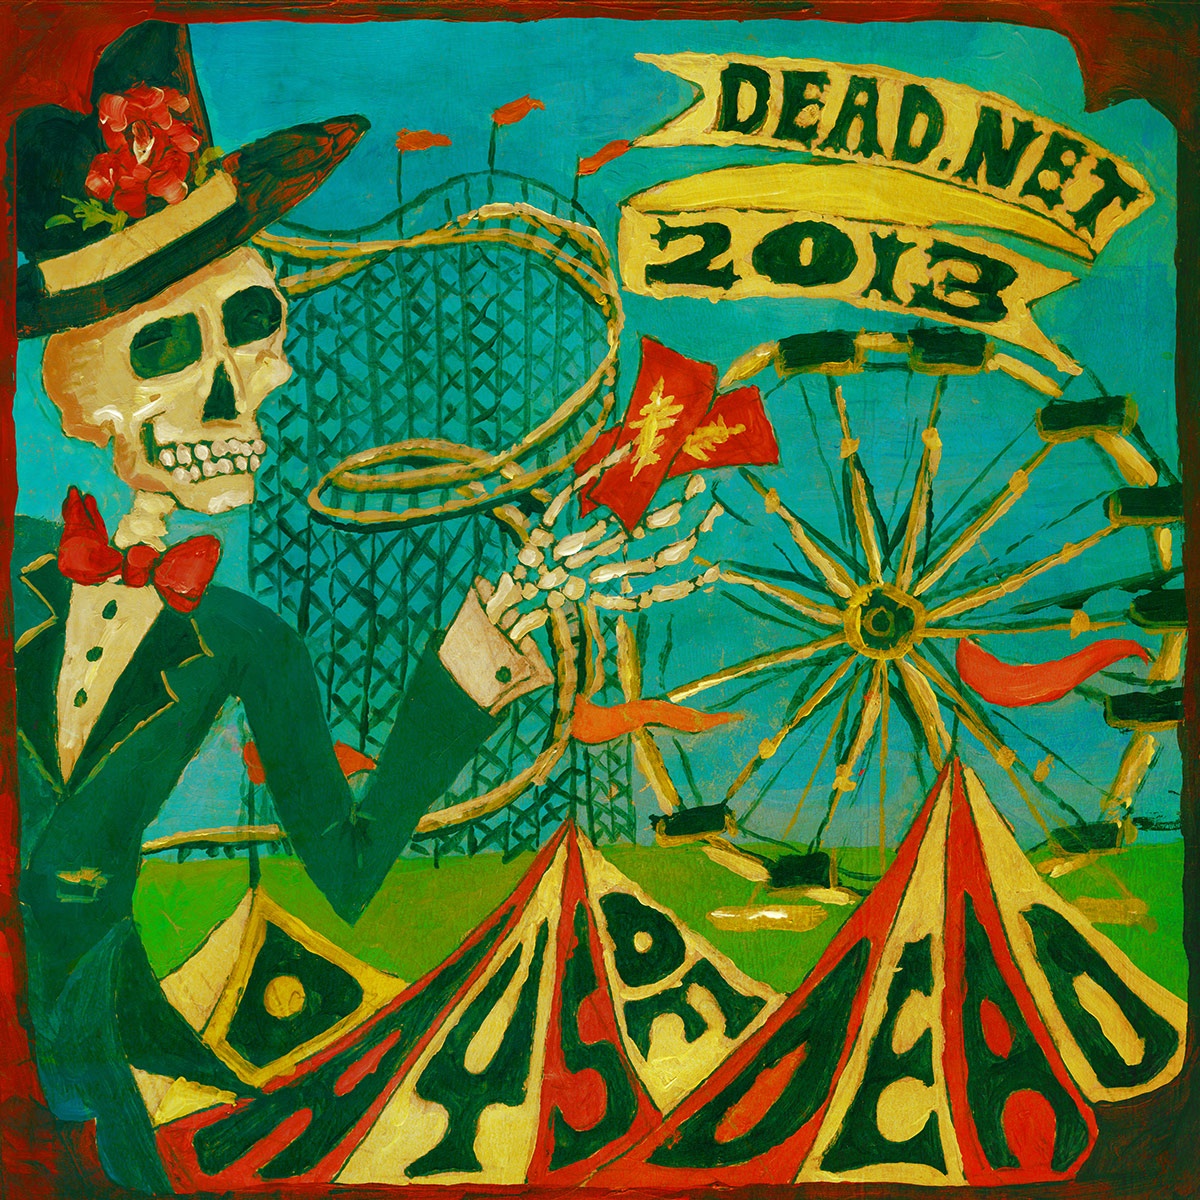 30 Days Of Dead 2013